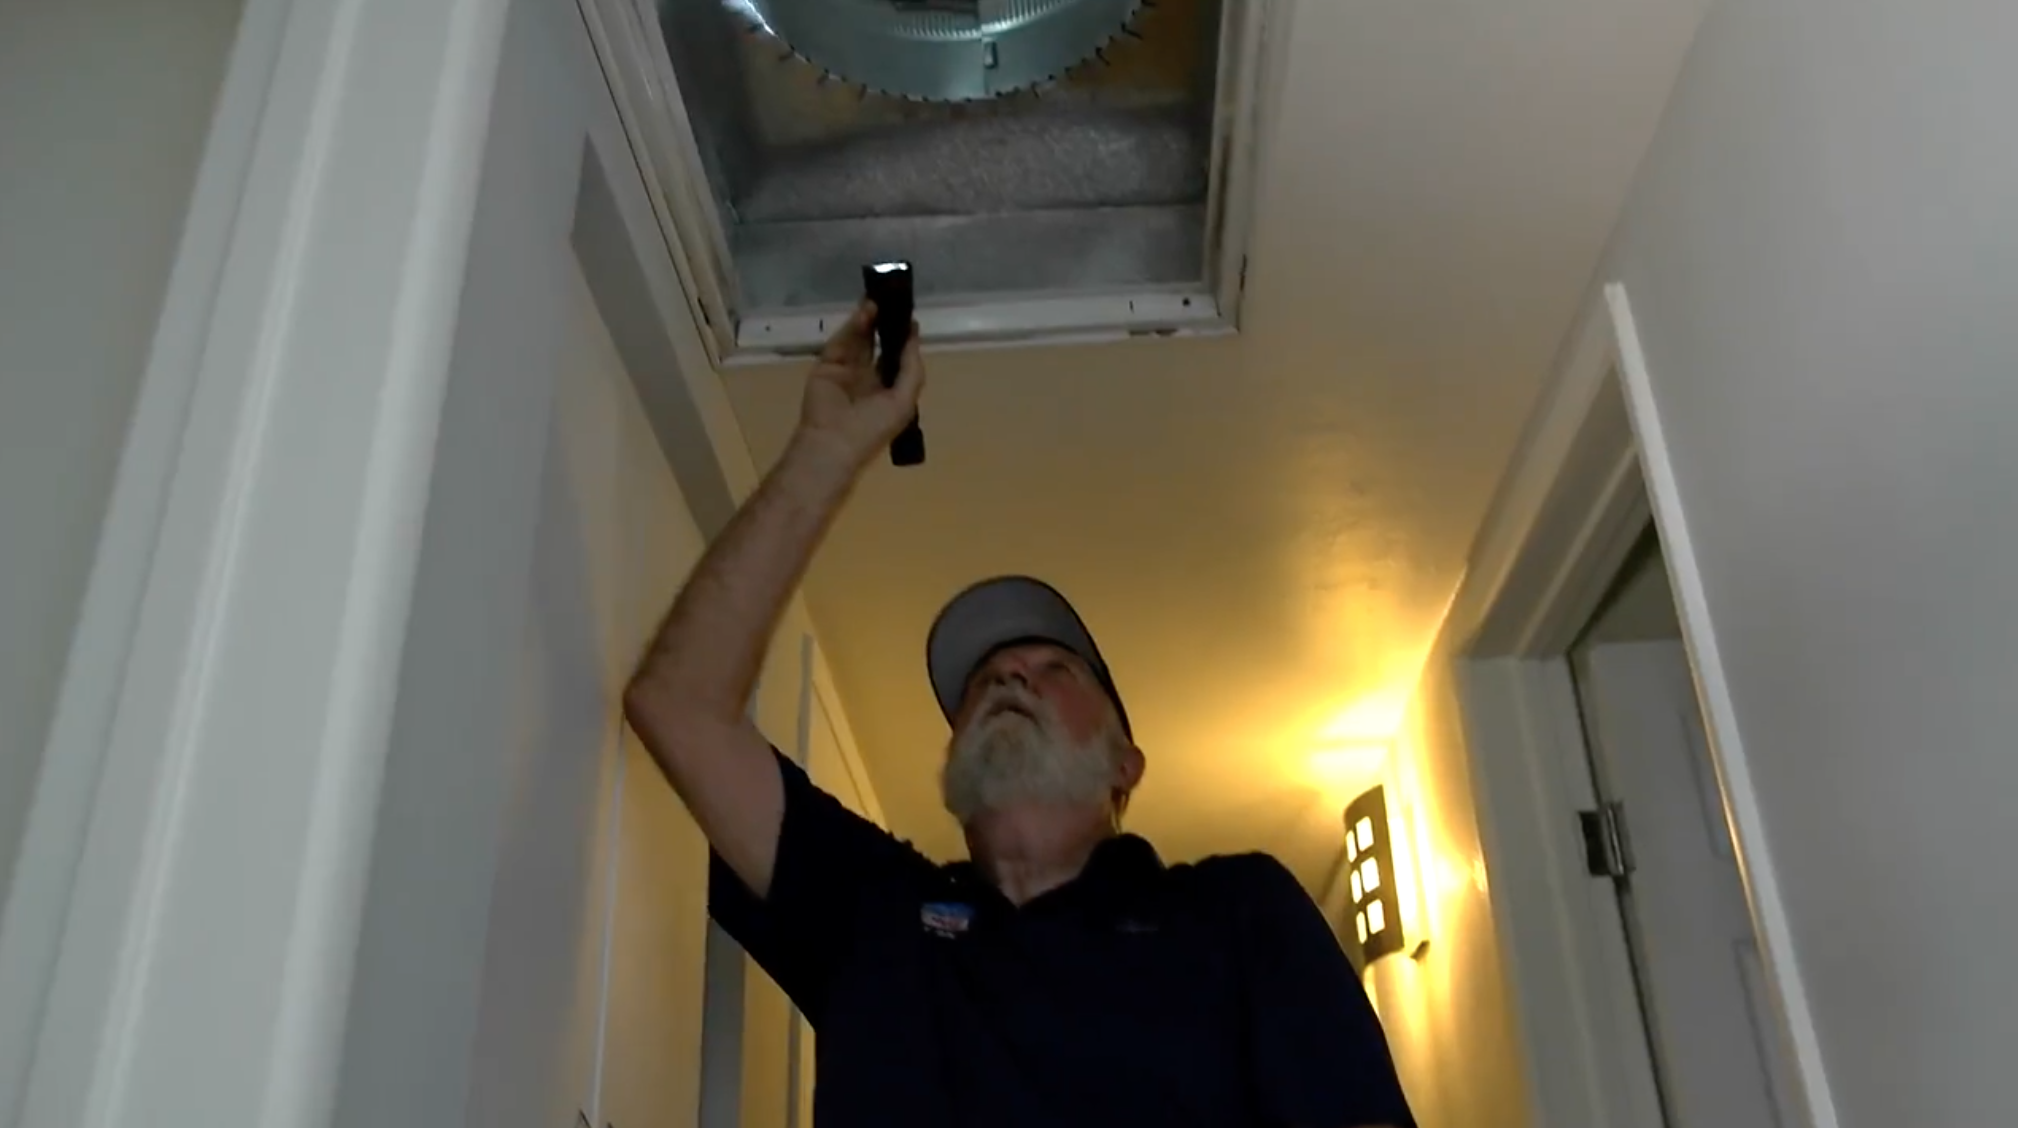 Inspecting air ducts for signs of mold.